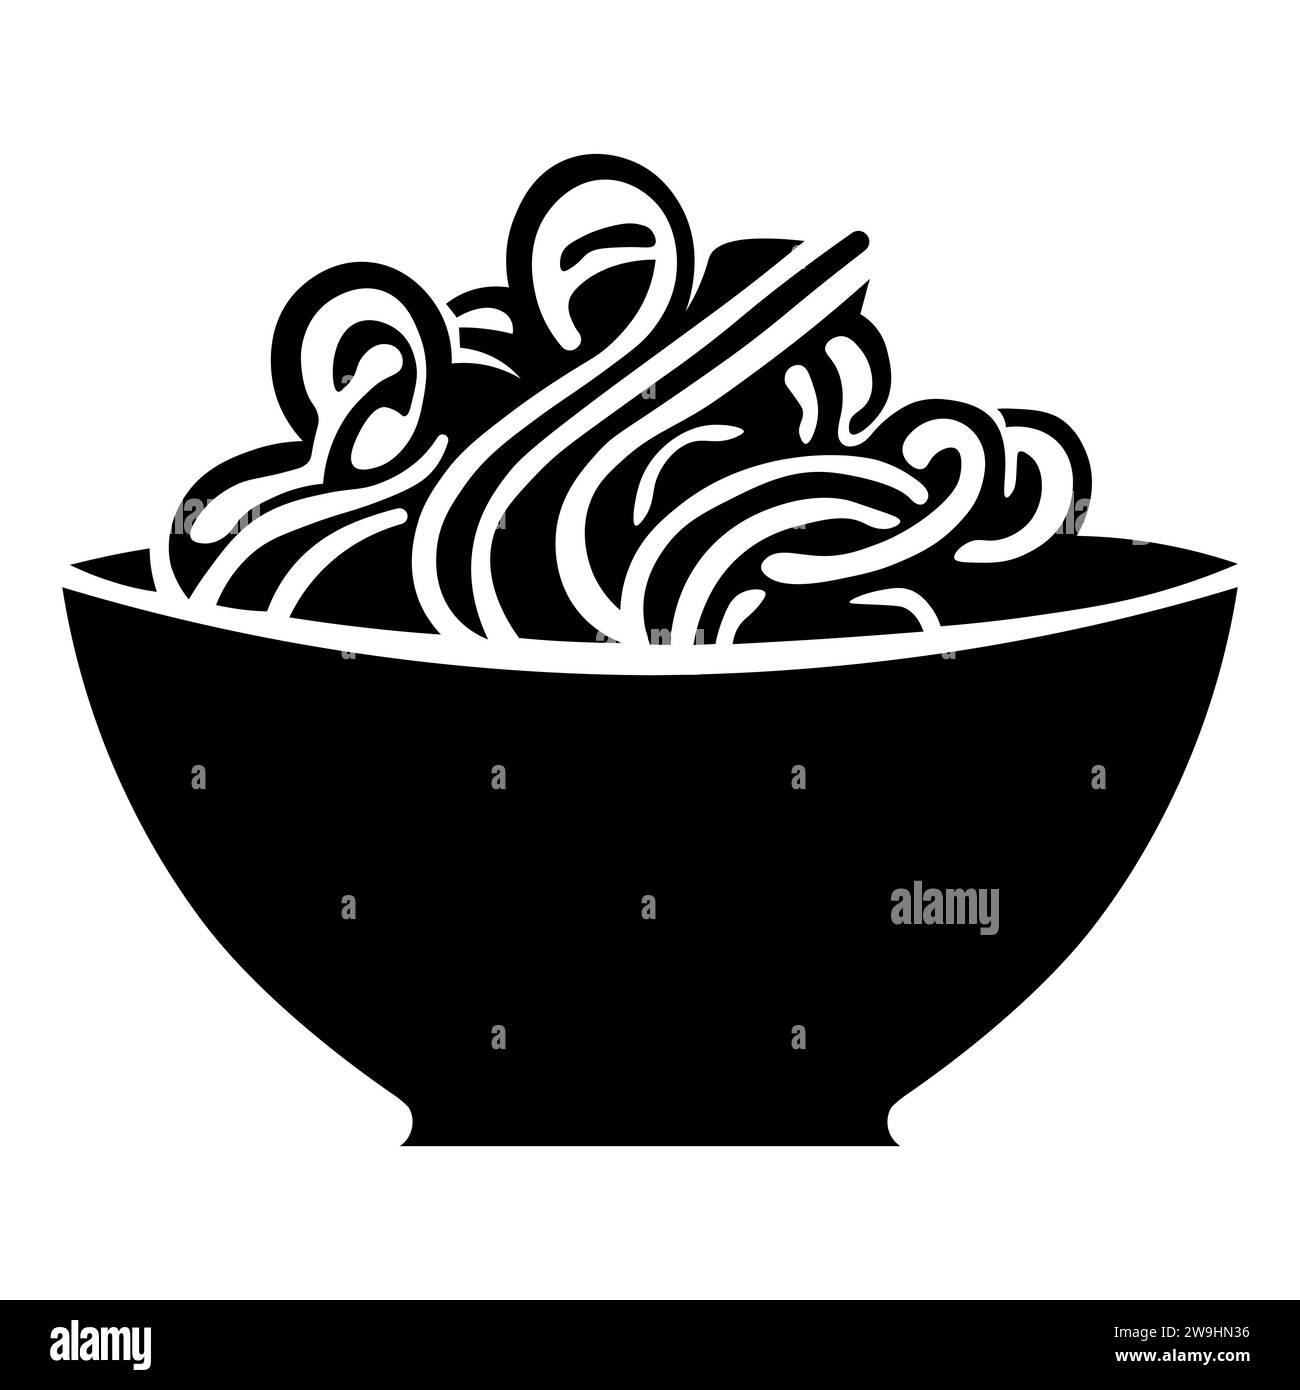 Noodles black vector icon on white background Stock Vector